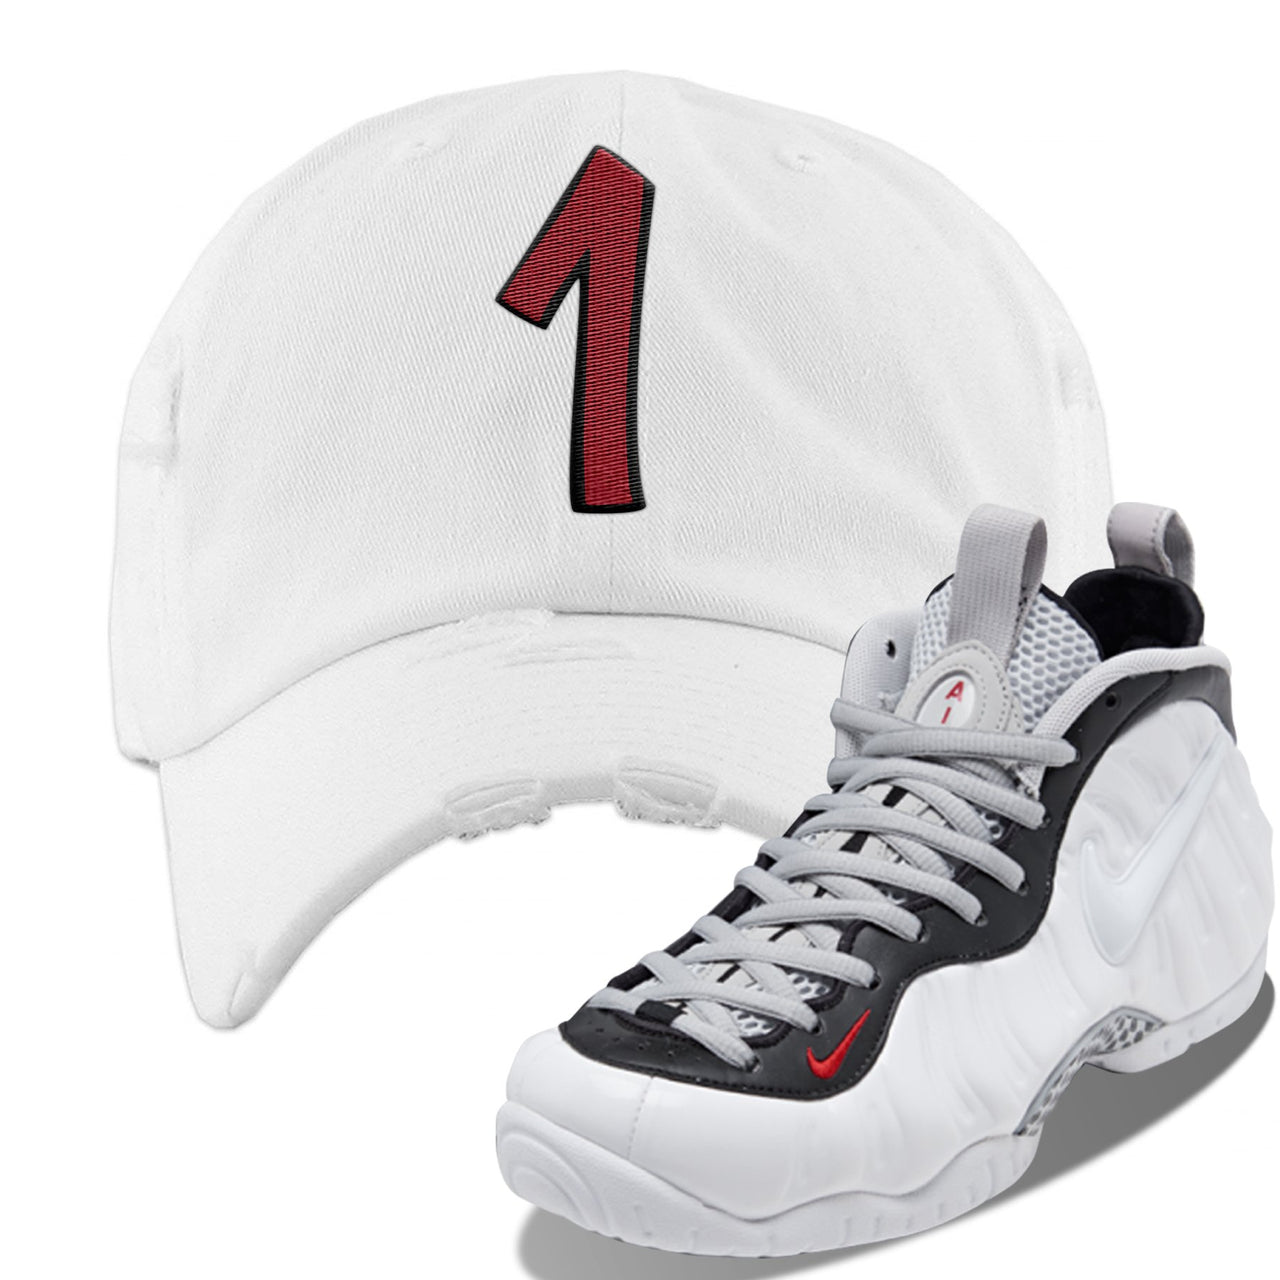 Foamposite Pro White Black University Red Sneaker White Distressed Dad Hat | Hat to match Nike Air Foamposite Pro White Black University Red Shoes | Penny One